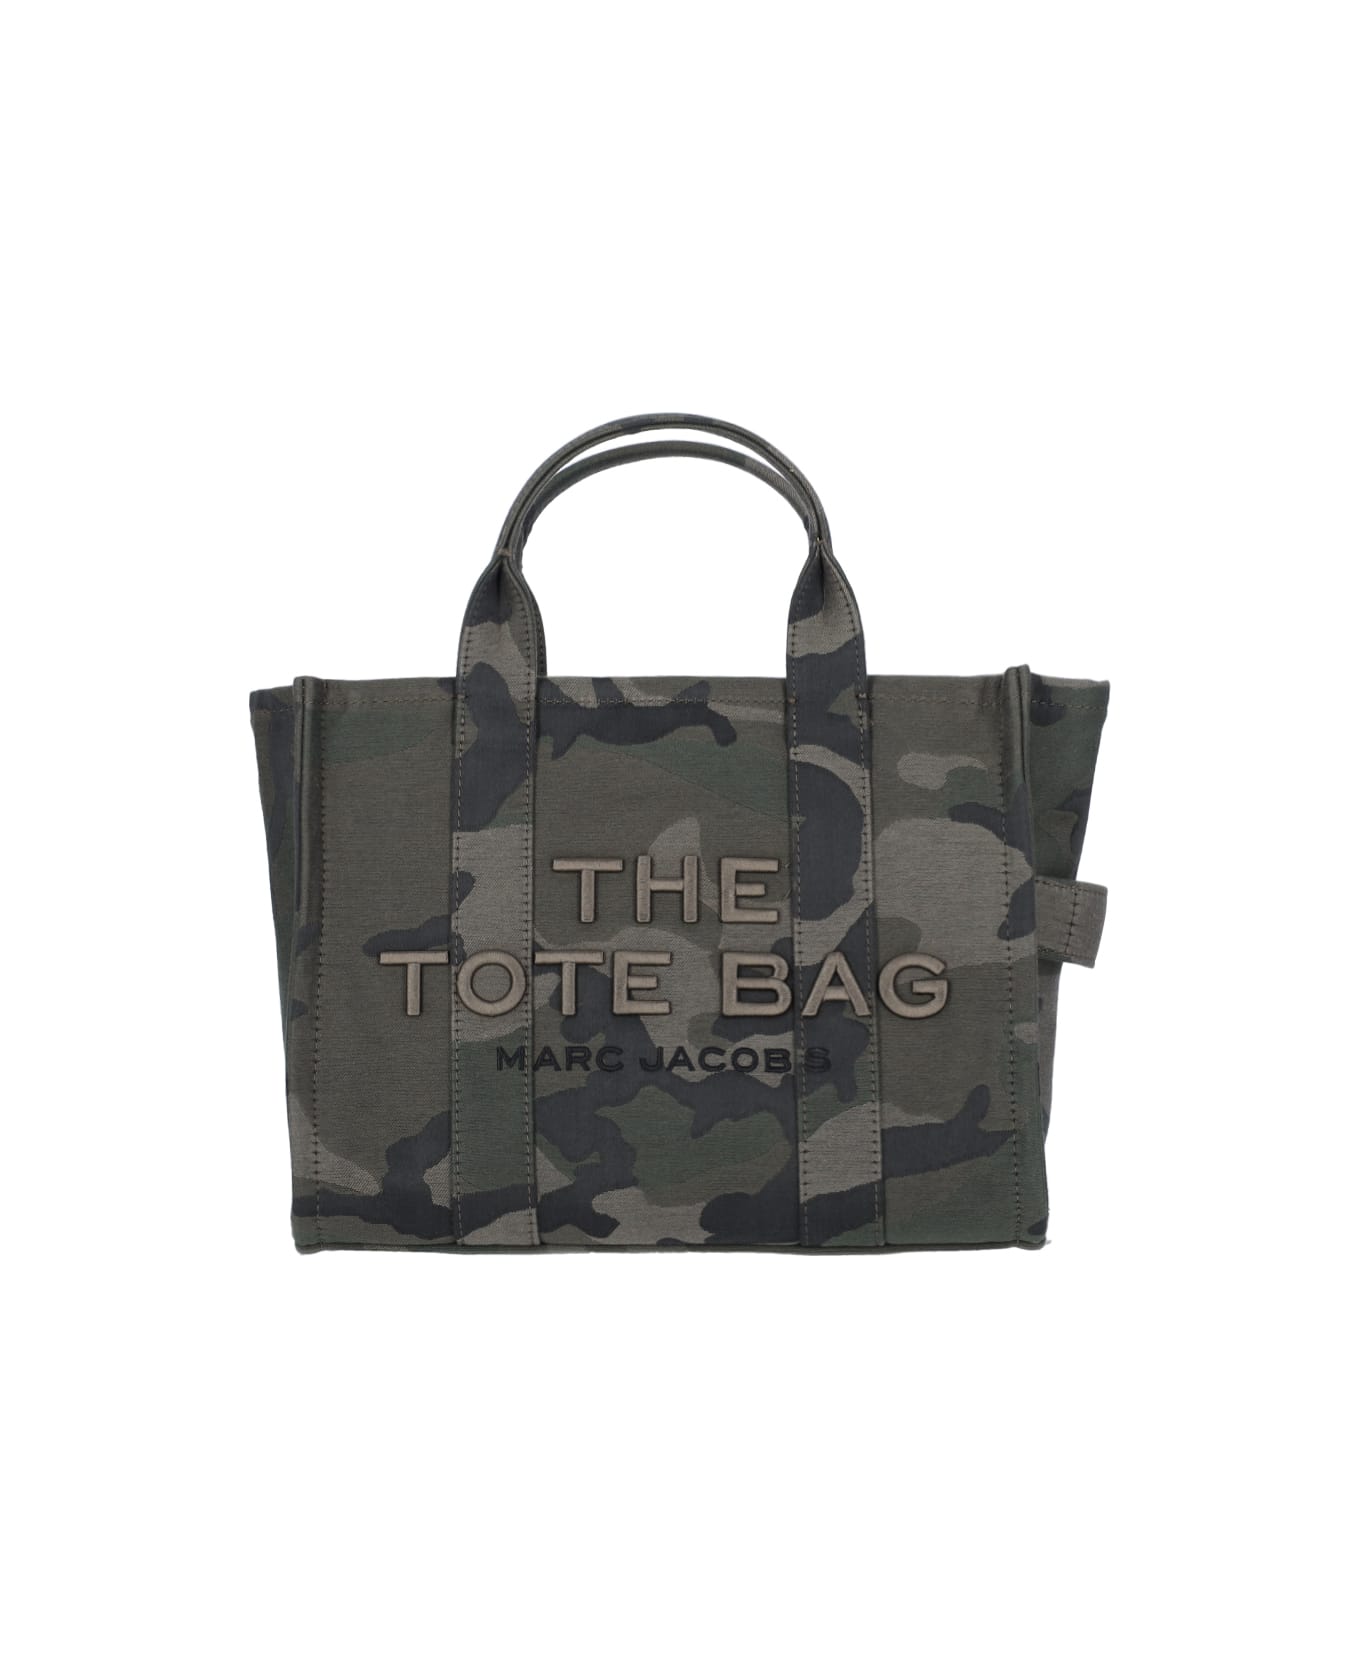 Marc Jacobs Traveler Tote In Camouflage Cotton - Green トートバッグ